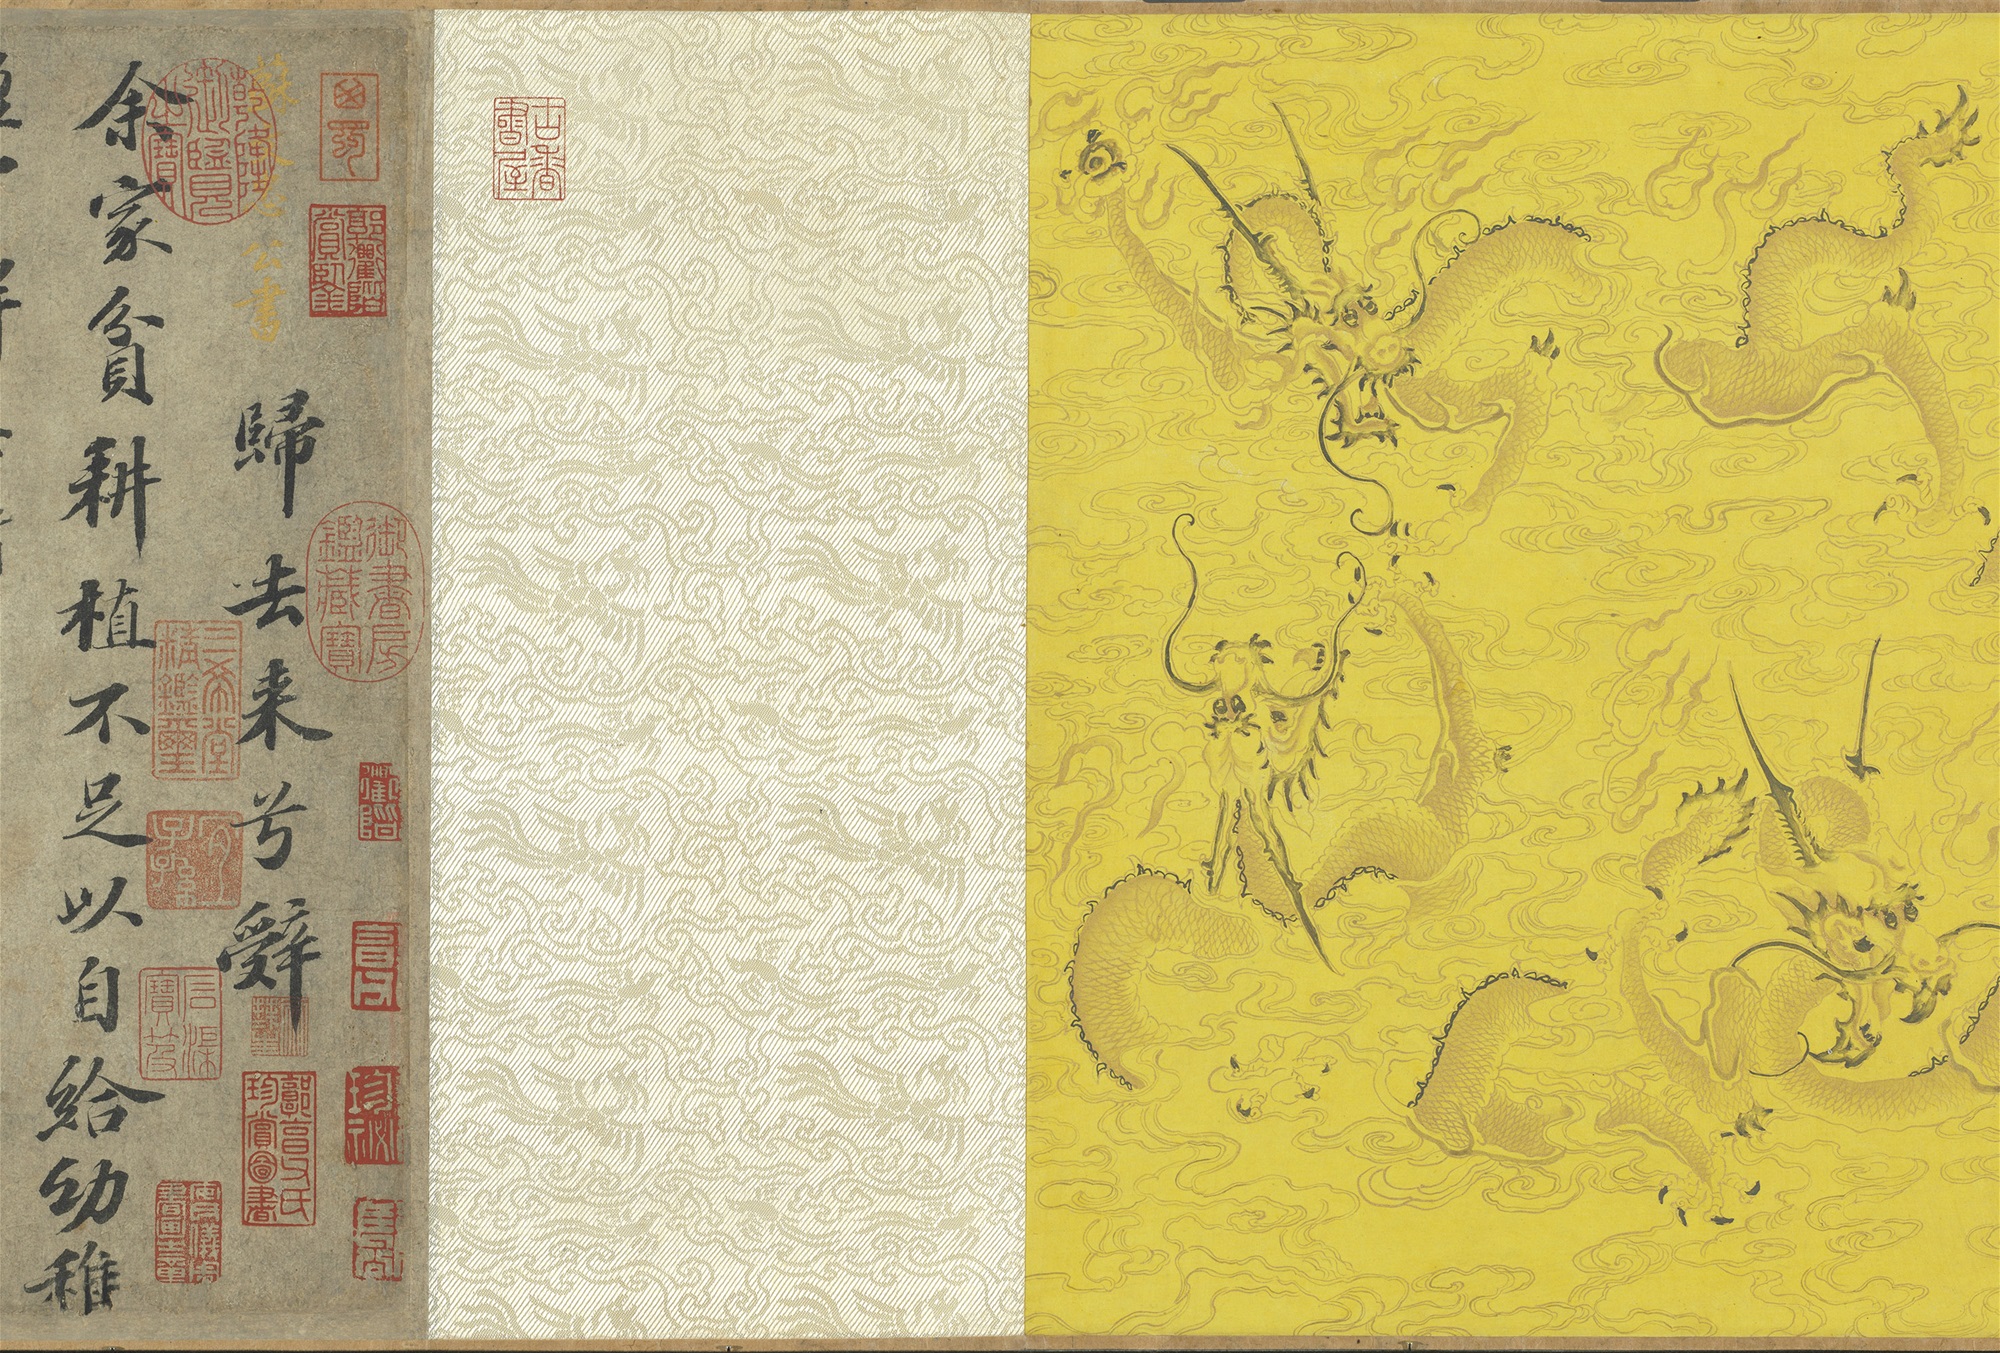 Homecoming Ode, Attributed to Su Shi (1037-1101), Song dynastypreview